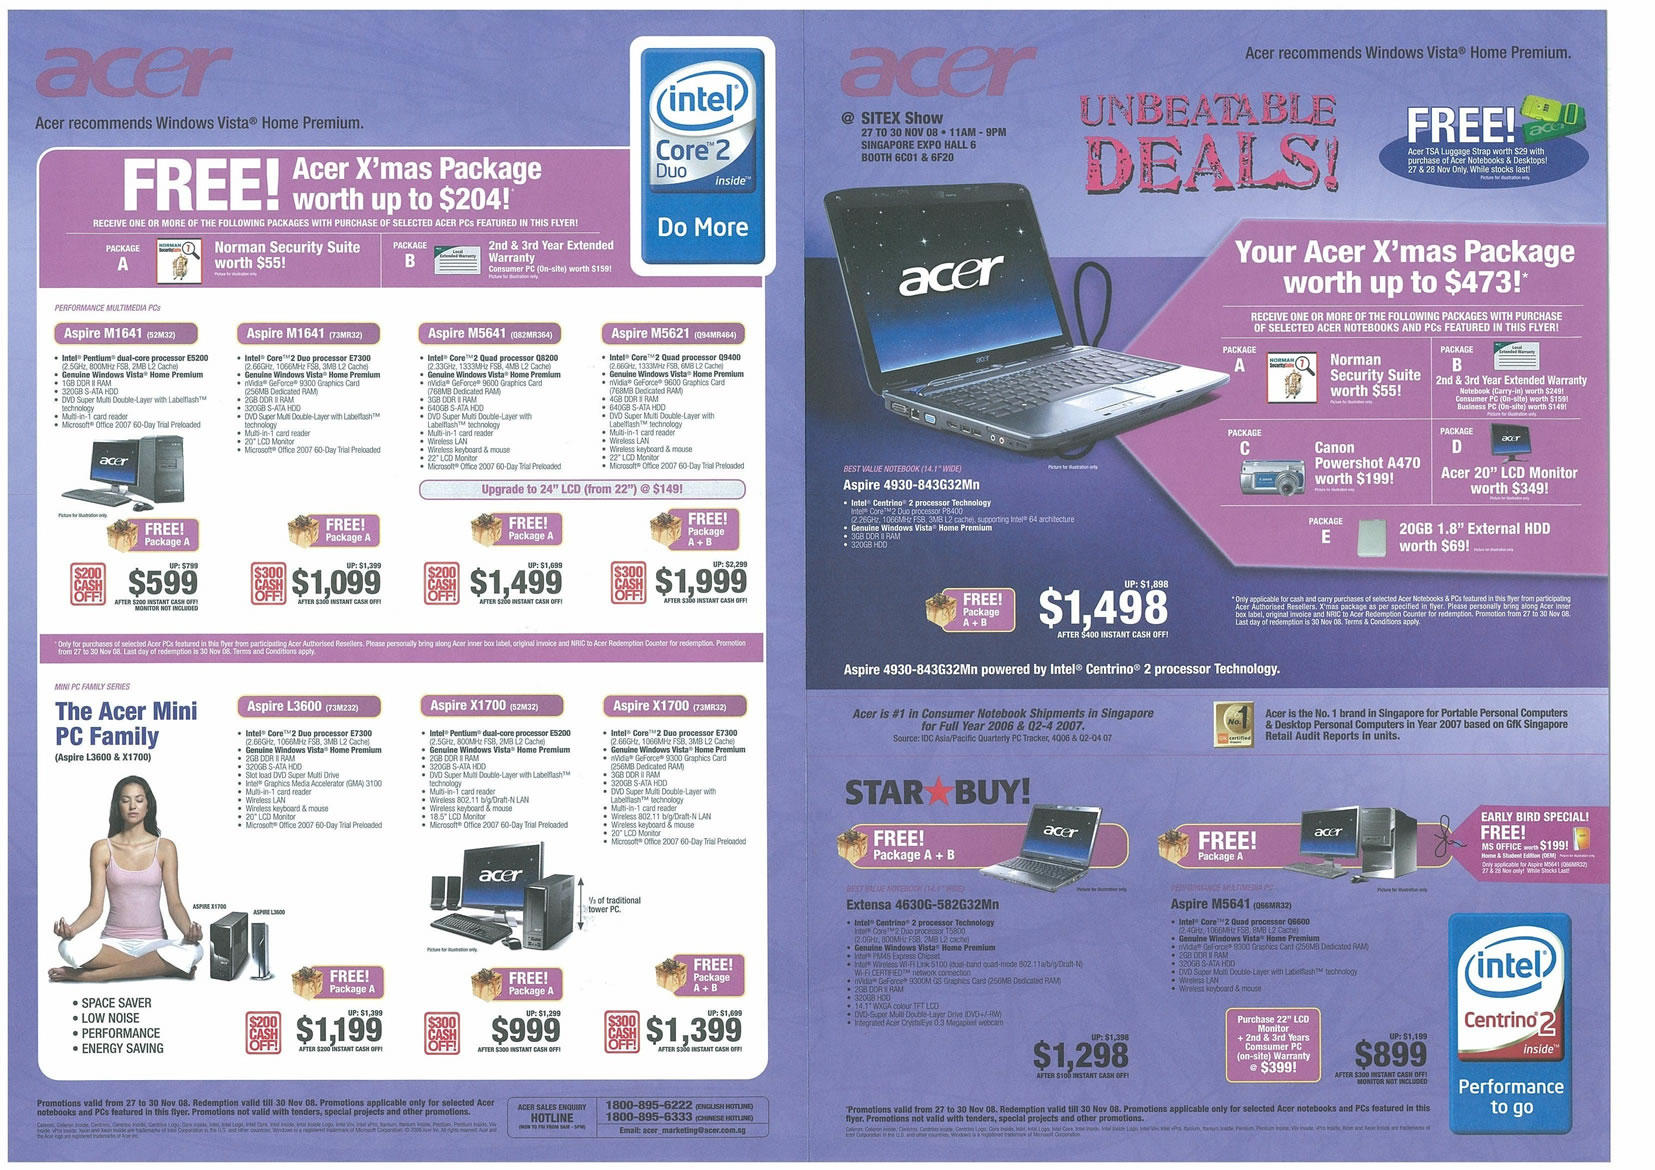 Sitex 2008 price list image brochure of Acer 01 Page 1 - Vr-zone Tclong